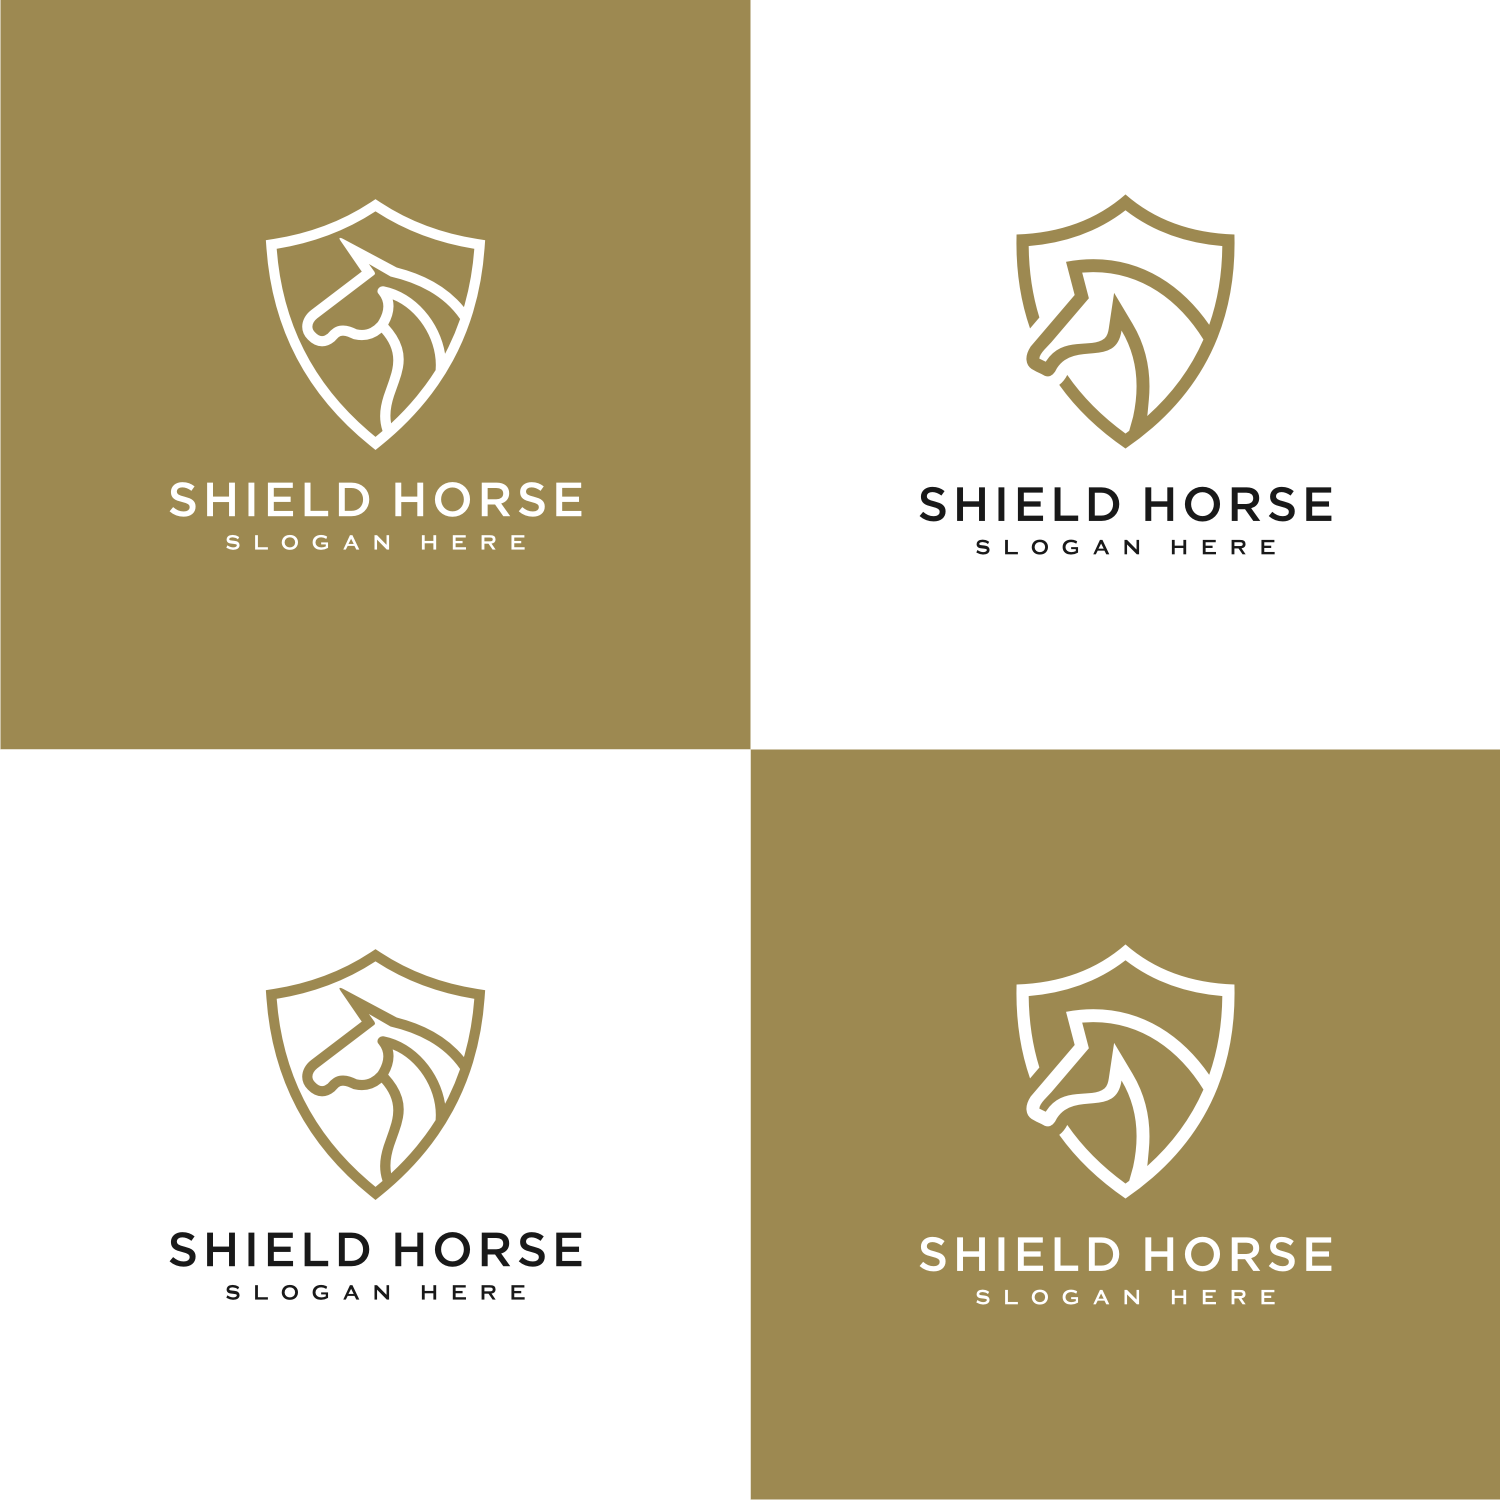 2 Head Horse And Shield Logo Vector Cover Image.